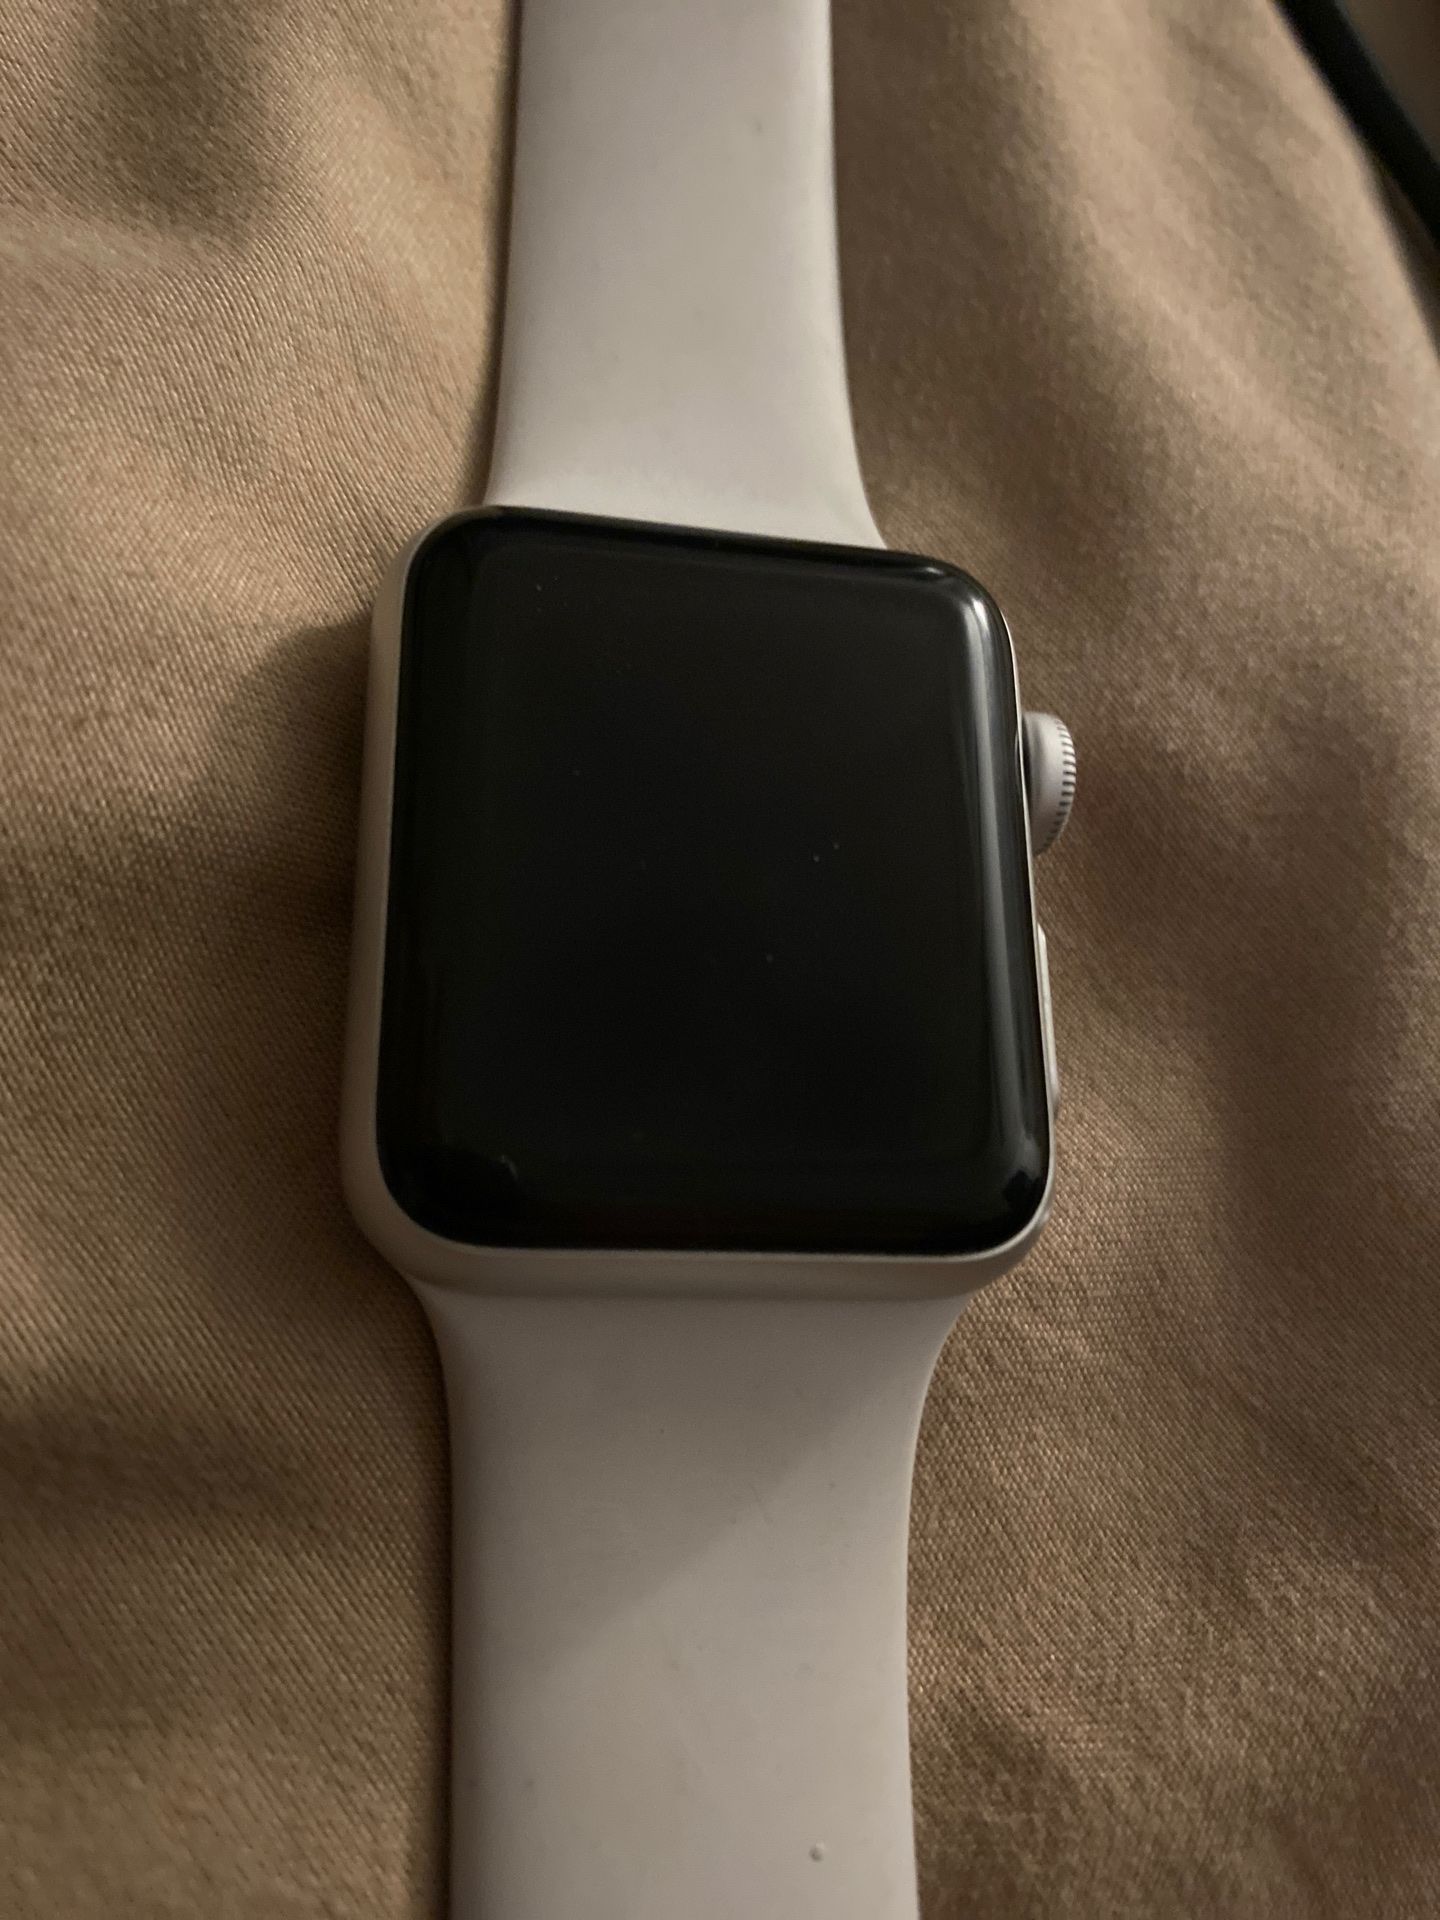 Apple Watch 3 gps and cellular